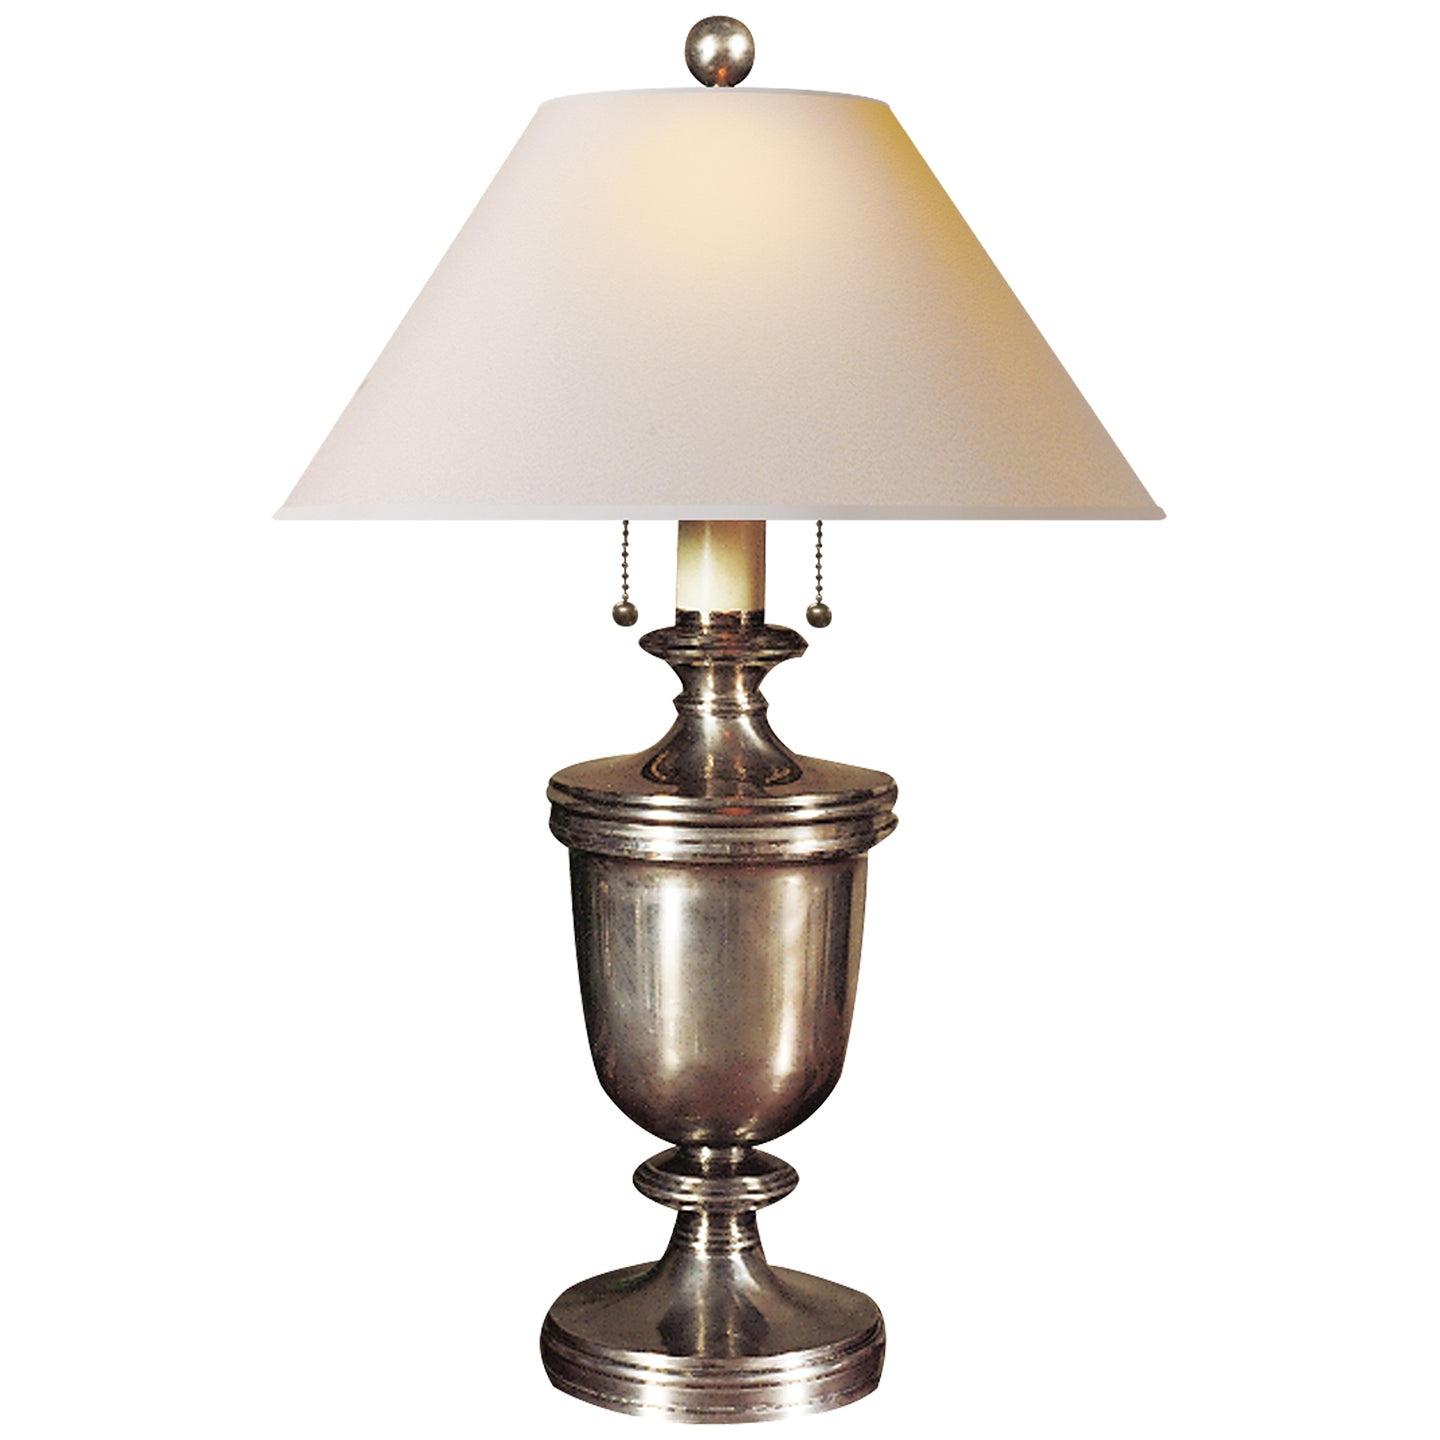 Visual Comfort Signature - CHA 8172AN-NP - Two Light Table Lamp - Classical Urn - Antique Nickel